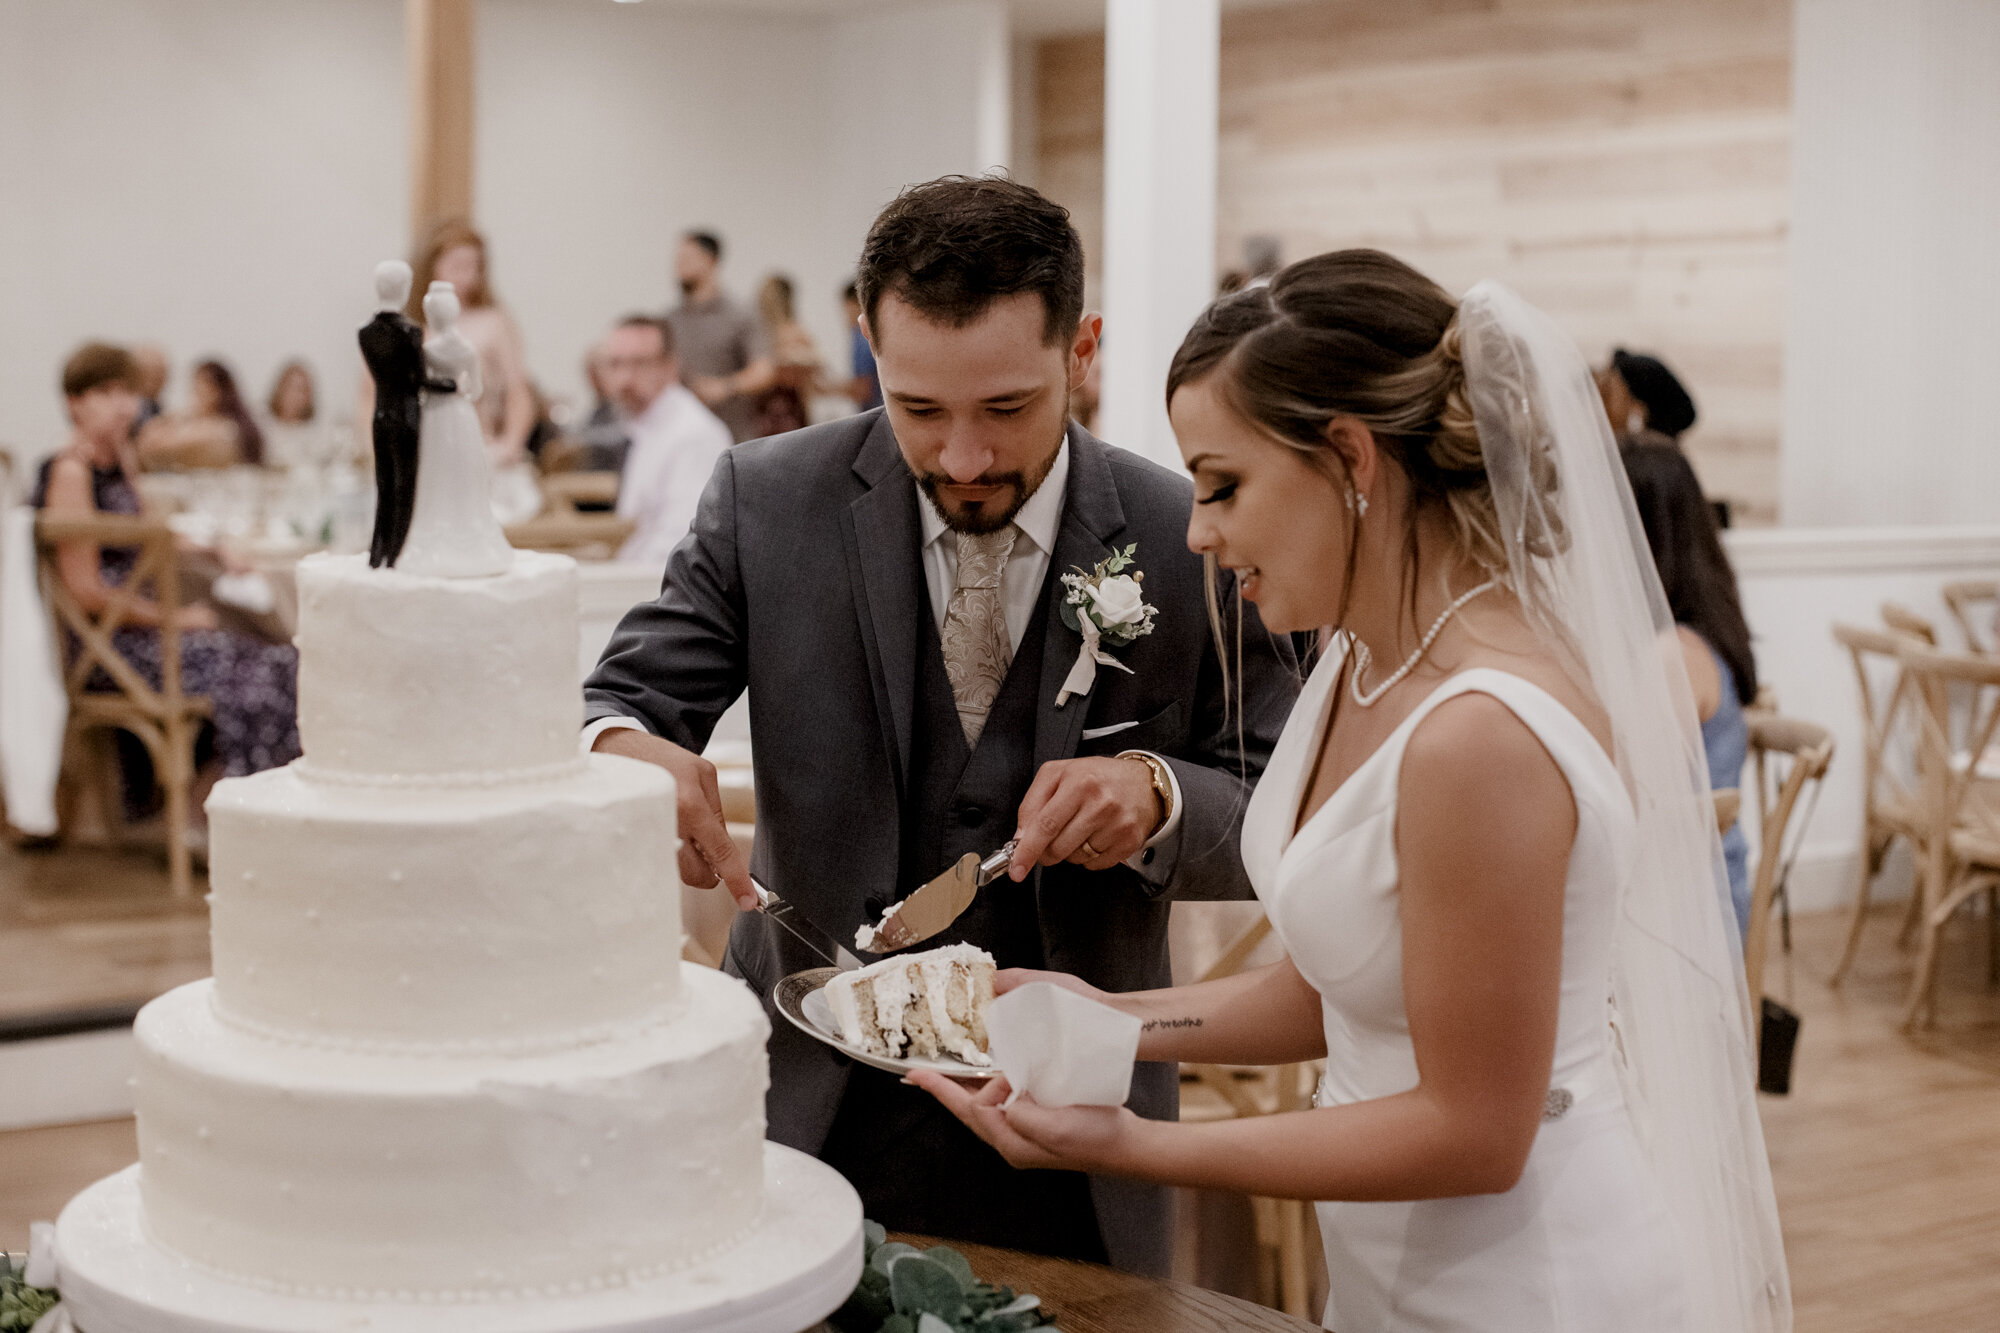 Bride and groom cutting the cake. Glowing Wedding in Golden Champagne Tones at The Orchard at Caney Creek in Wharton, TX